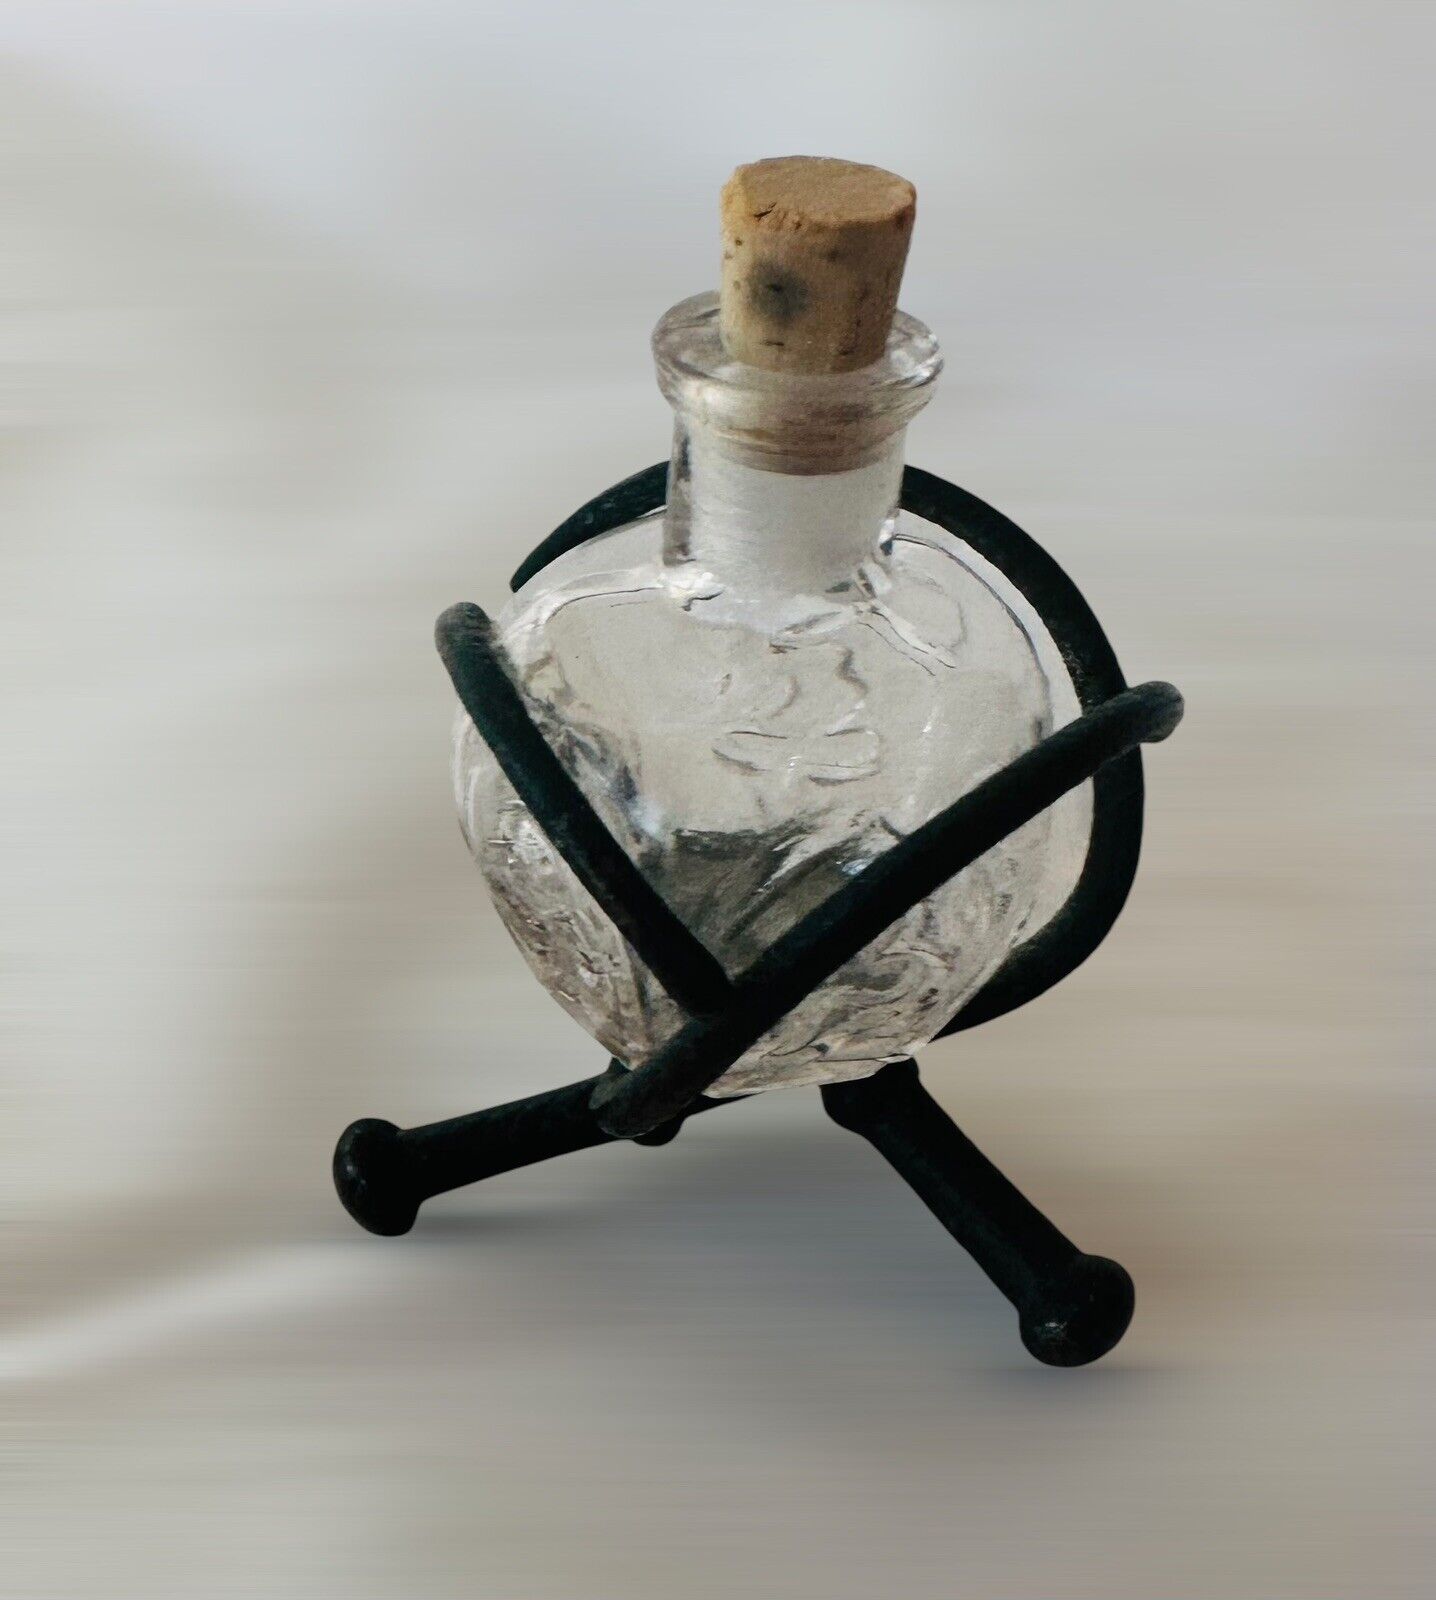 Antique 1920s  Small Glass Perfume Bottle In Wrought Iron Holder with Cork Top